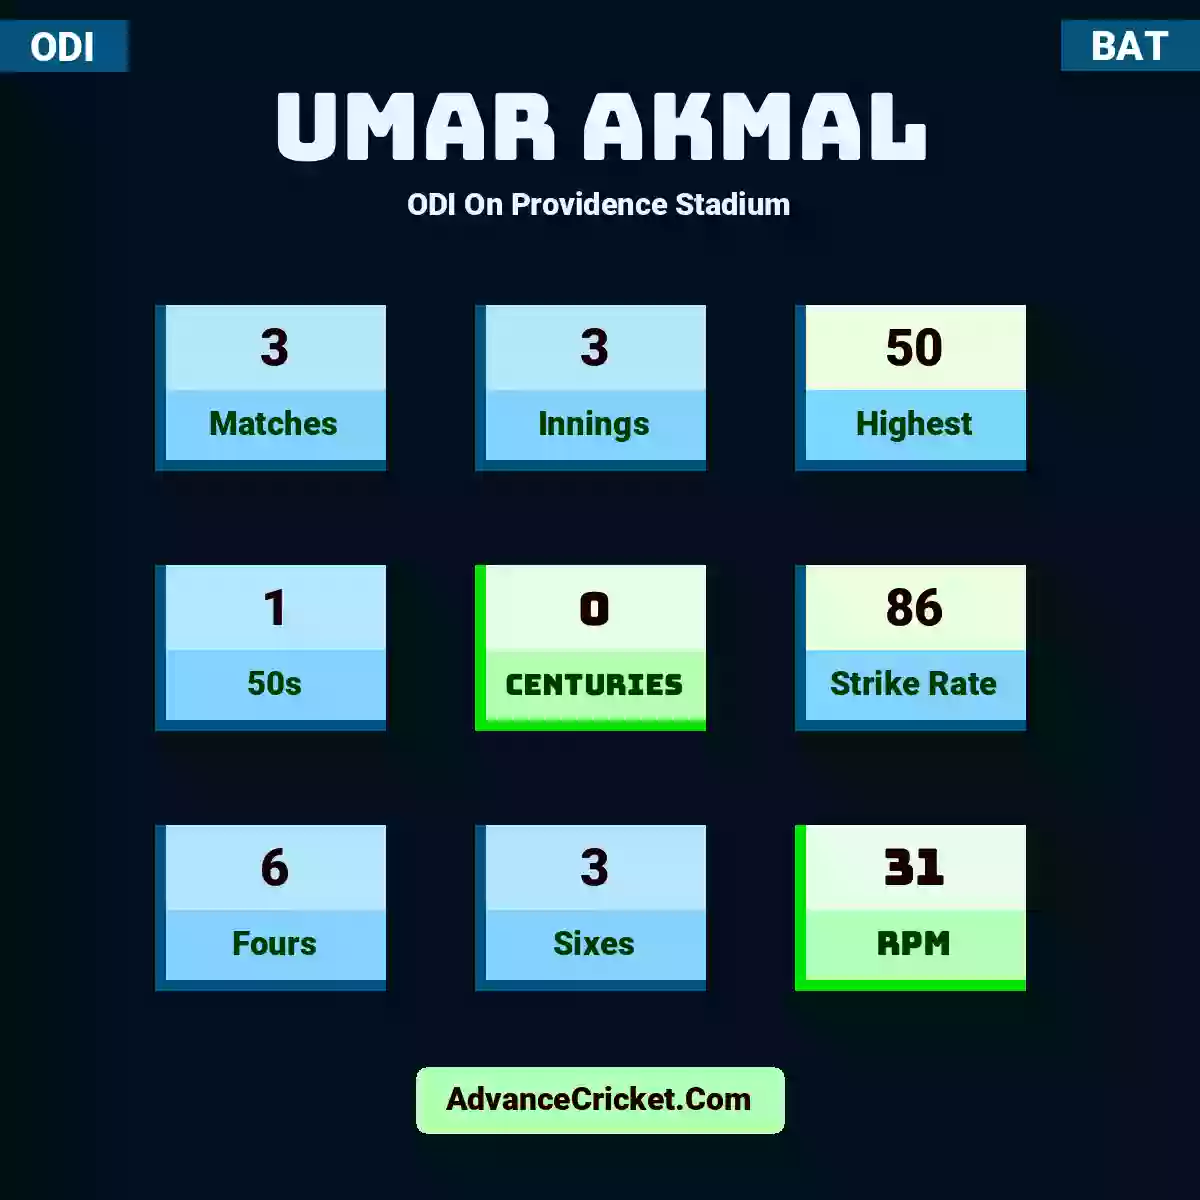 Umar Akmal ODI  On Providence Stadium, Umar Akmal played 3 matches, scored 50 runs as highest, 1 half-centuries, and 0 centuries, with a strike rate of 86. U.Akmal hit 6 fours and 3 sixes, with an RPM of 31.